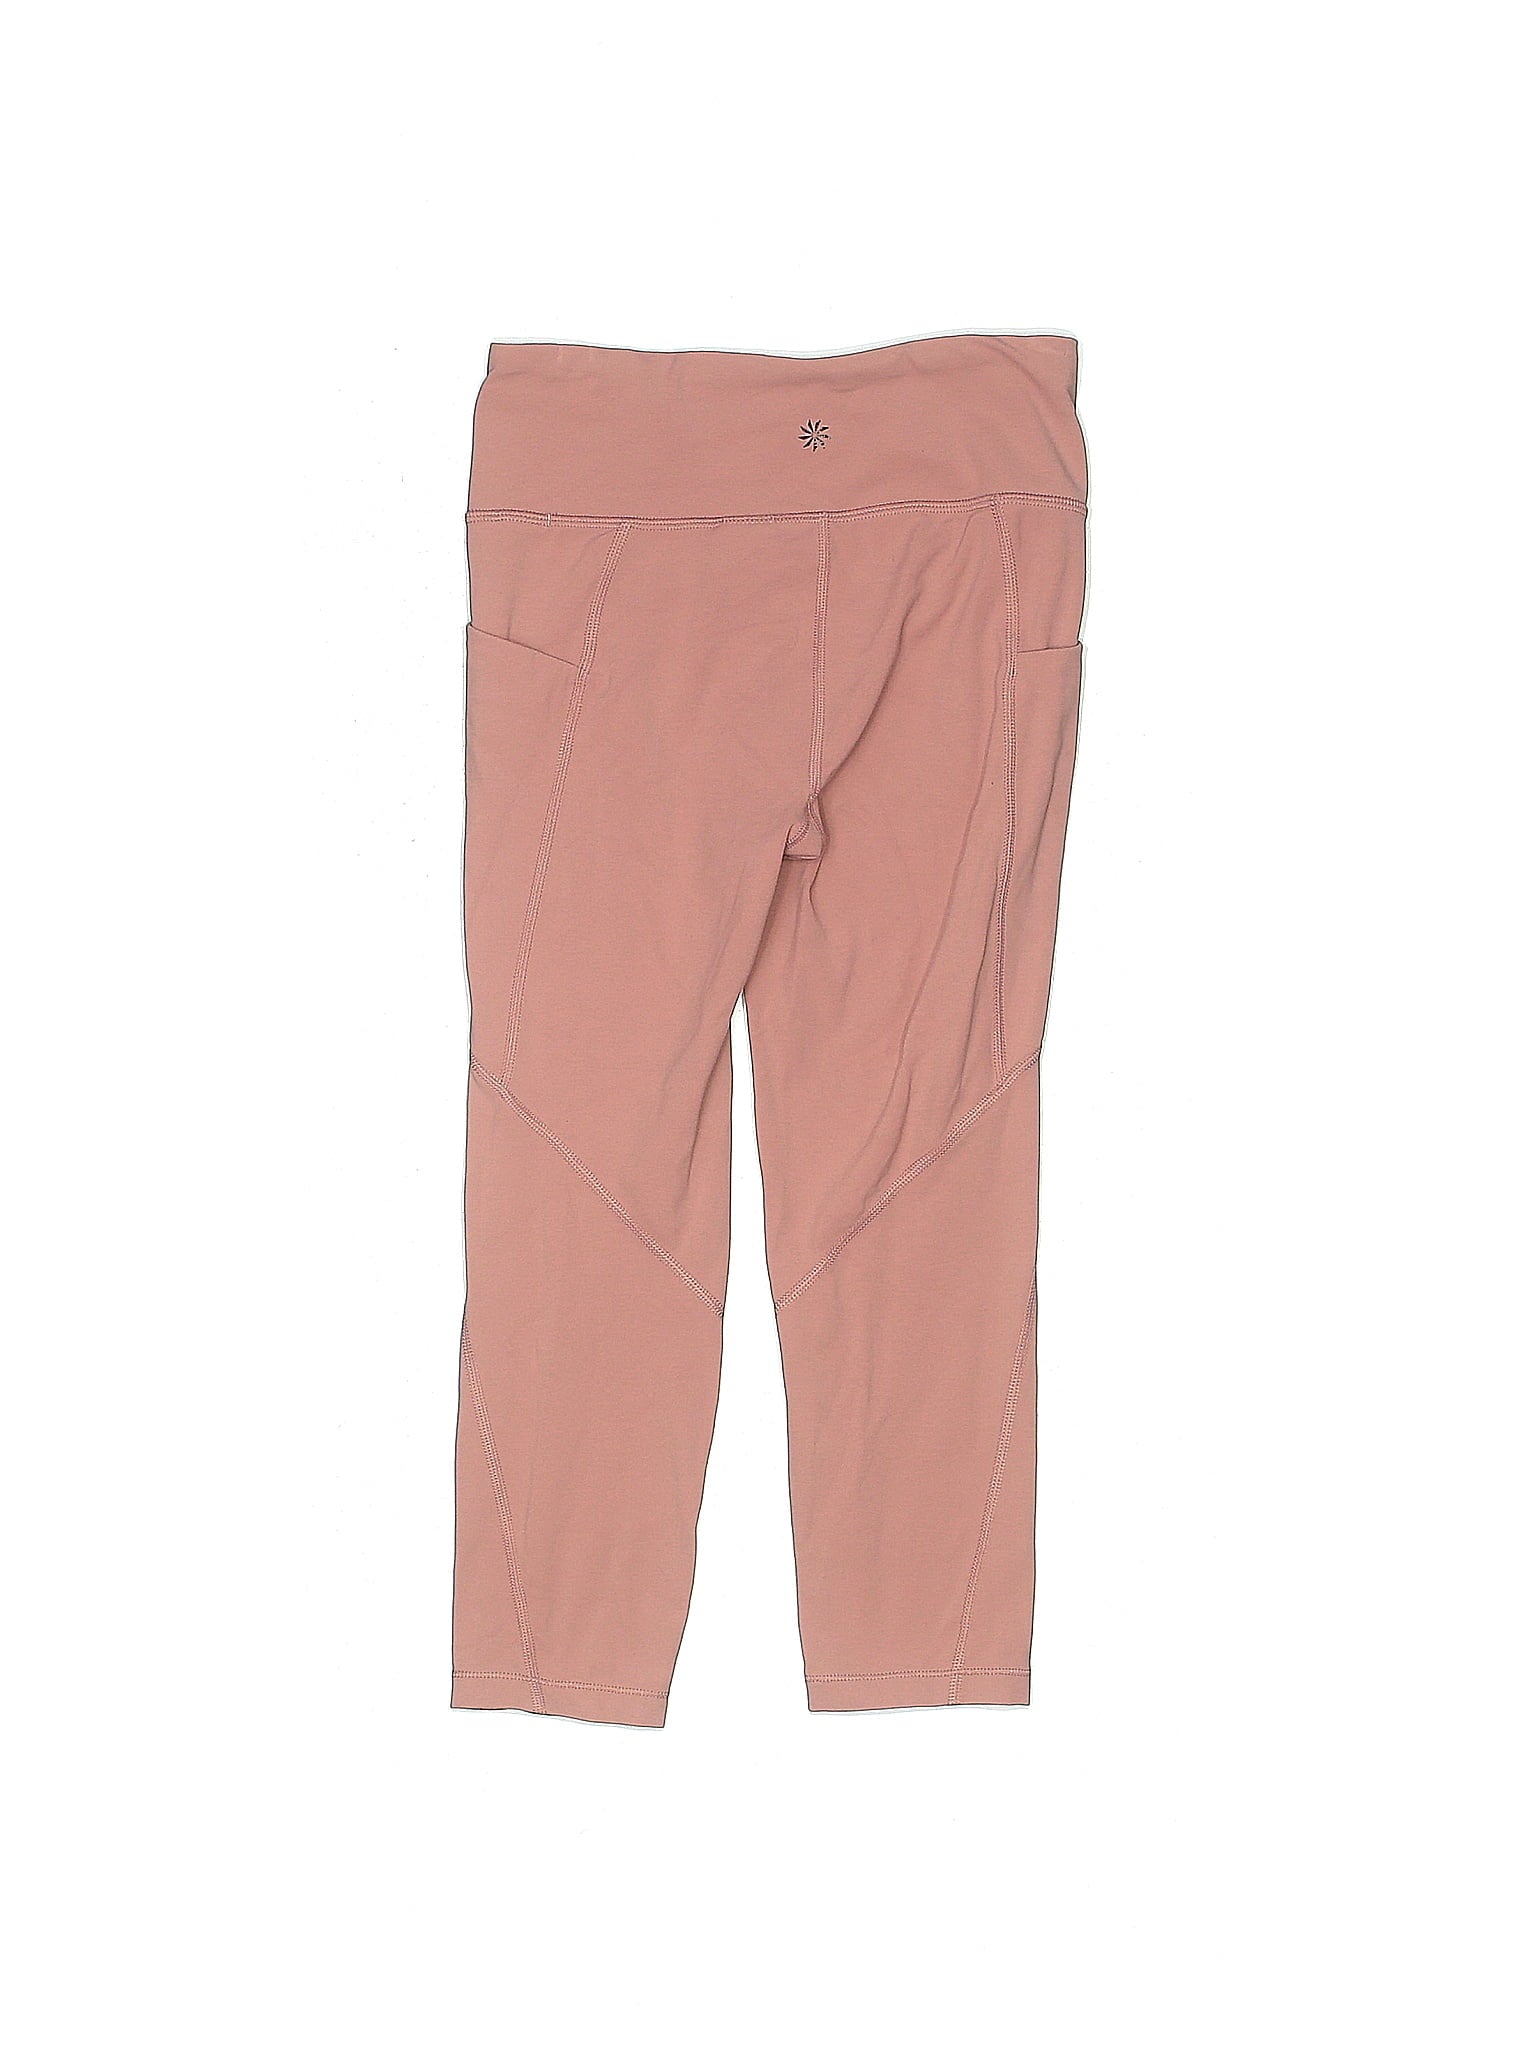 Active Pants size - L (Youth)